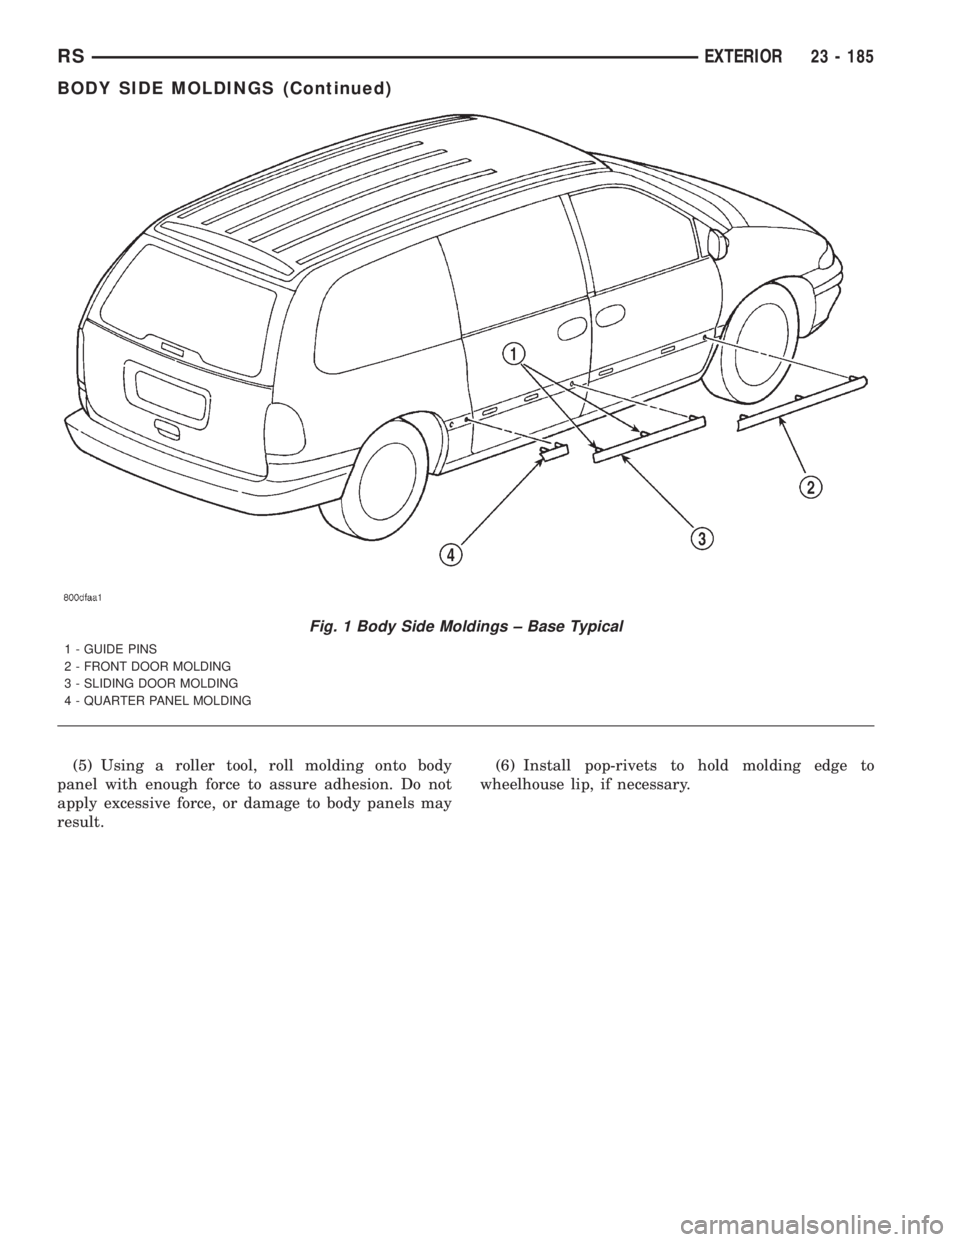 CHRYSLER VOYAGER 2001  Service Manual (5) Using a roller tool, roll molding onto body
panel with enough force to assure adhesion. Do not
apply excessive force, or damage to body panels may
result.(6) Install pop-rivets to hold molding edg